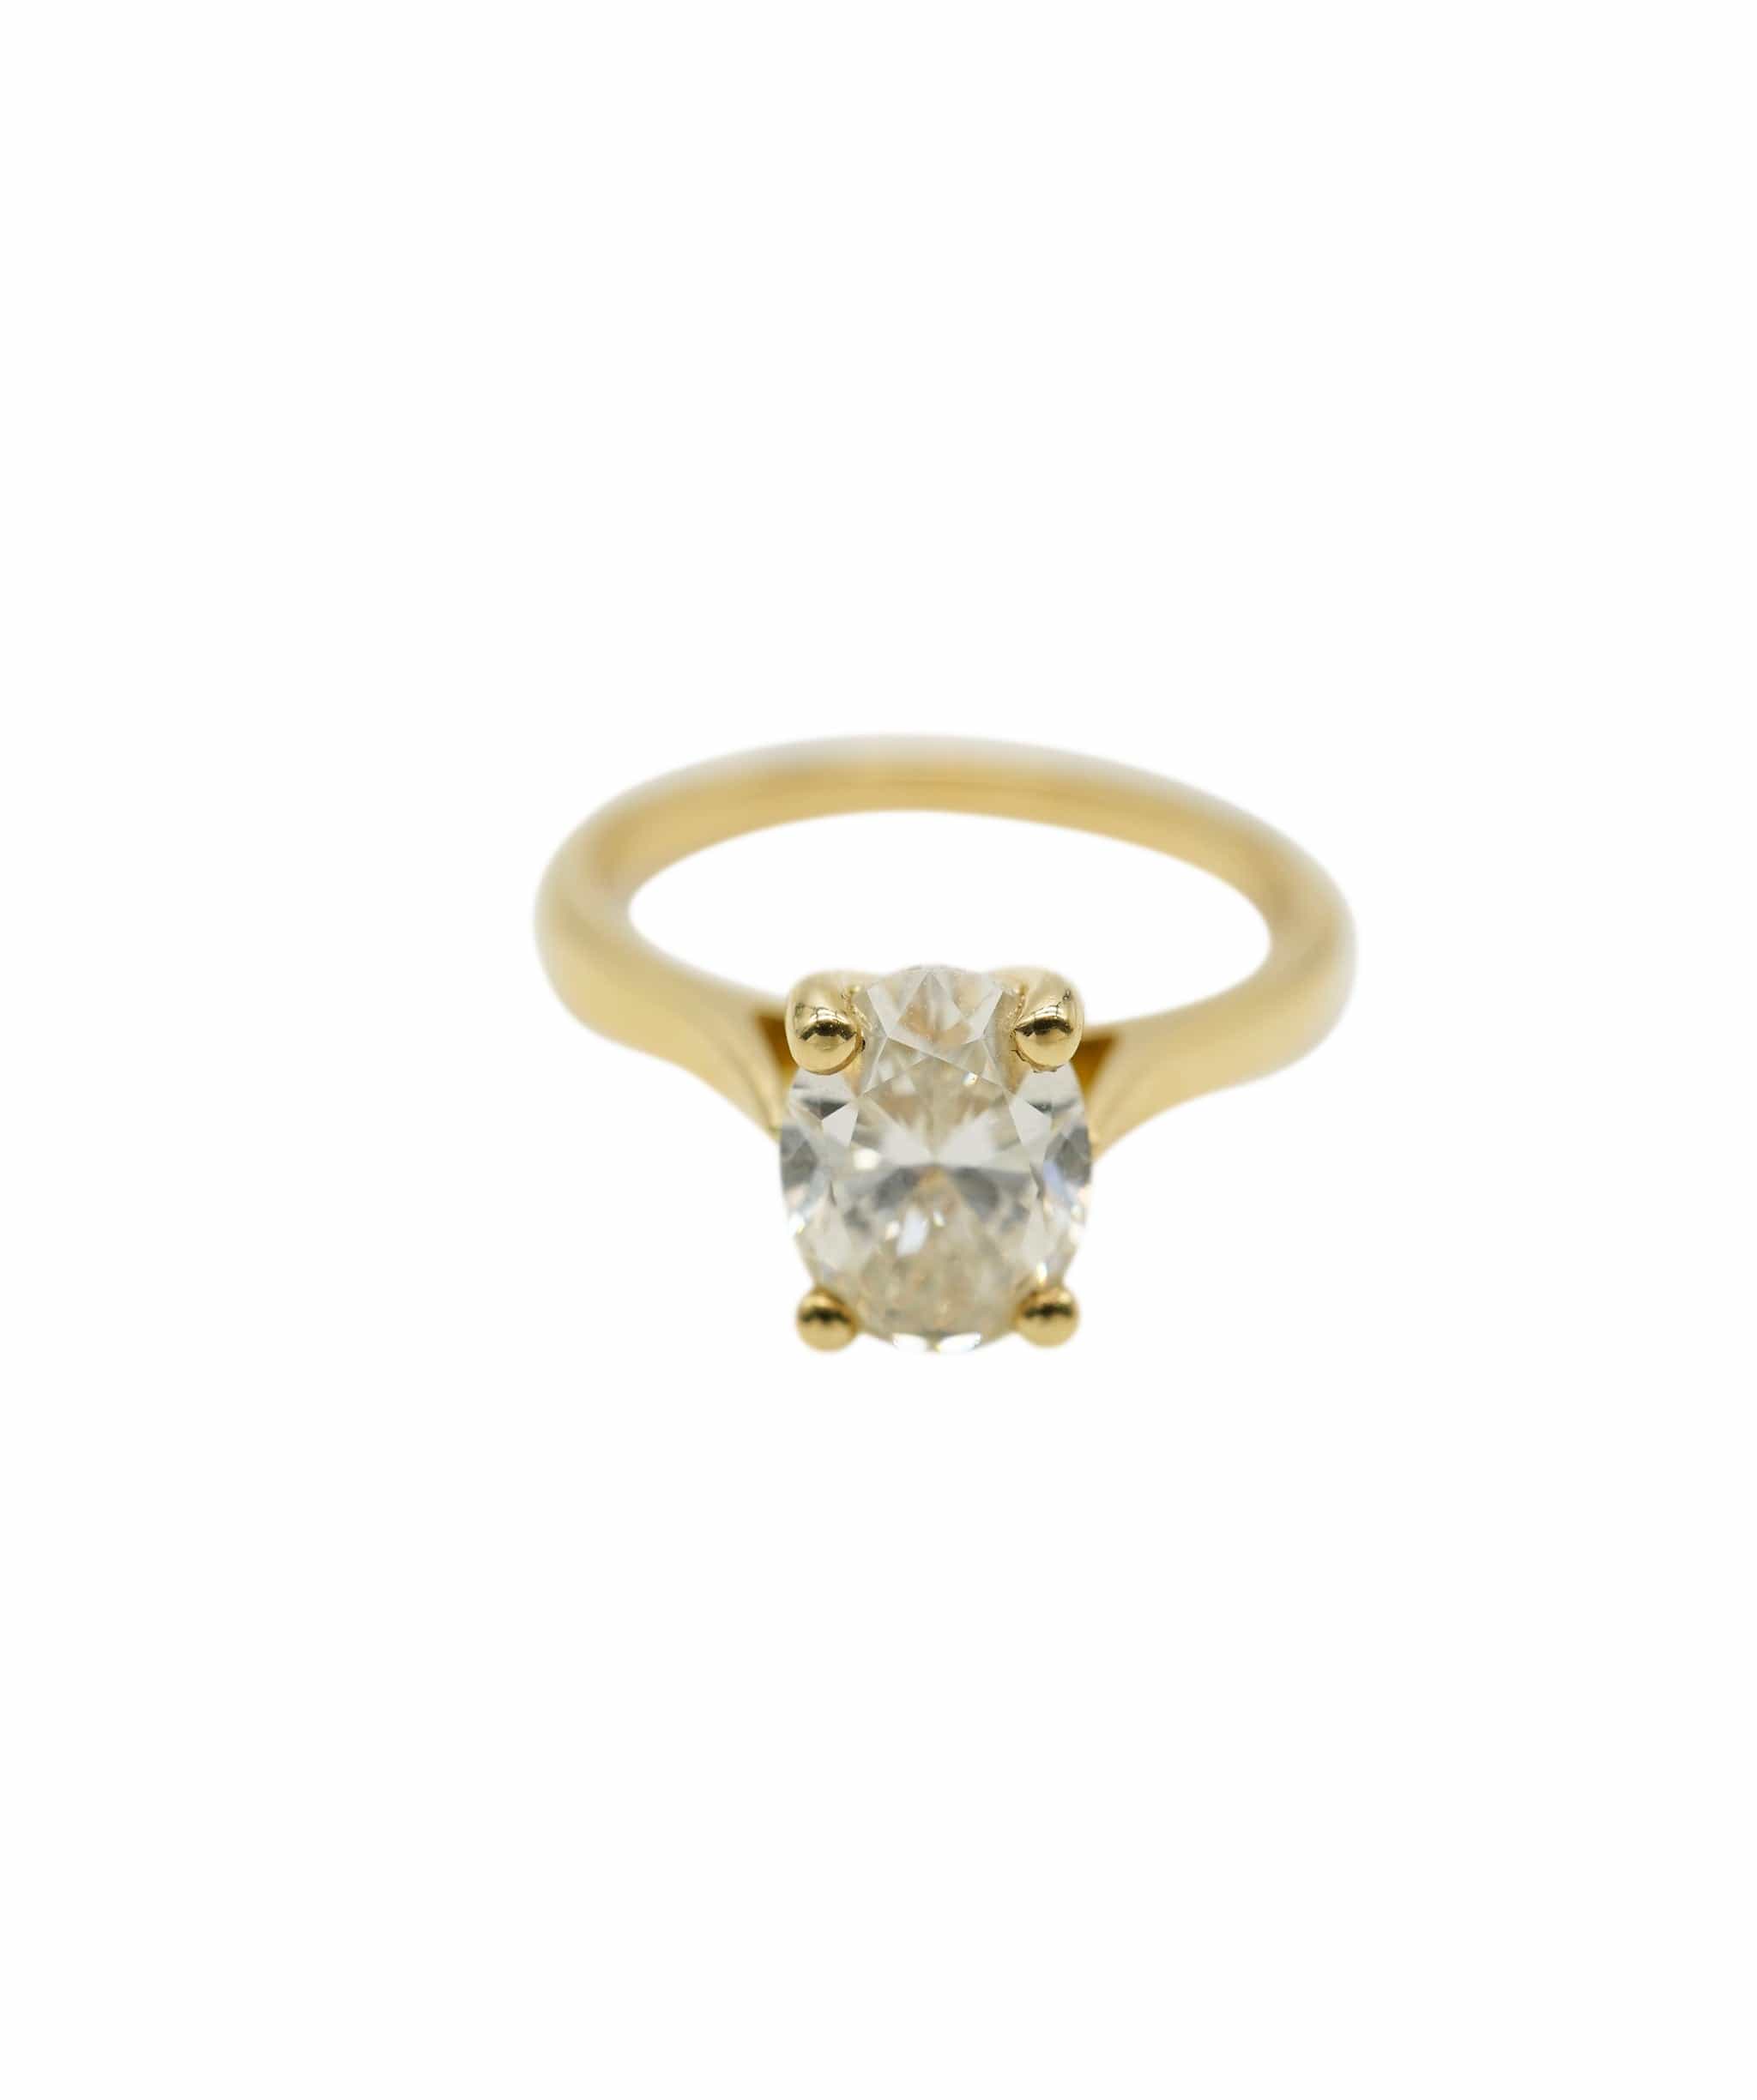 Luxury Promise Oval-shaped diamond, 1.70 carats, yellow gold ring AHC1802